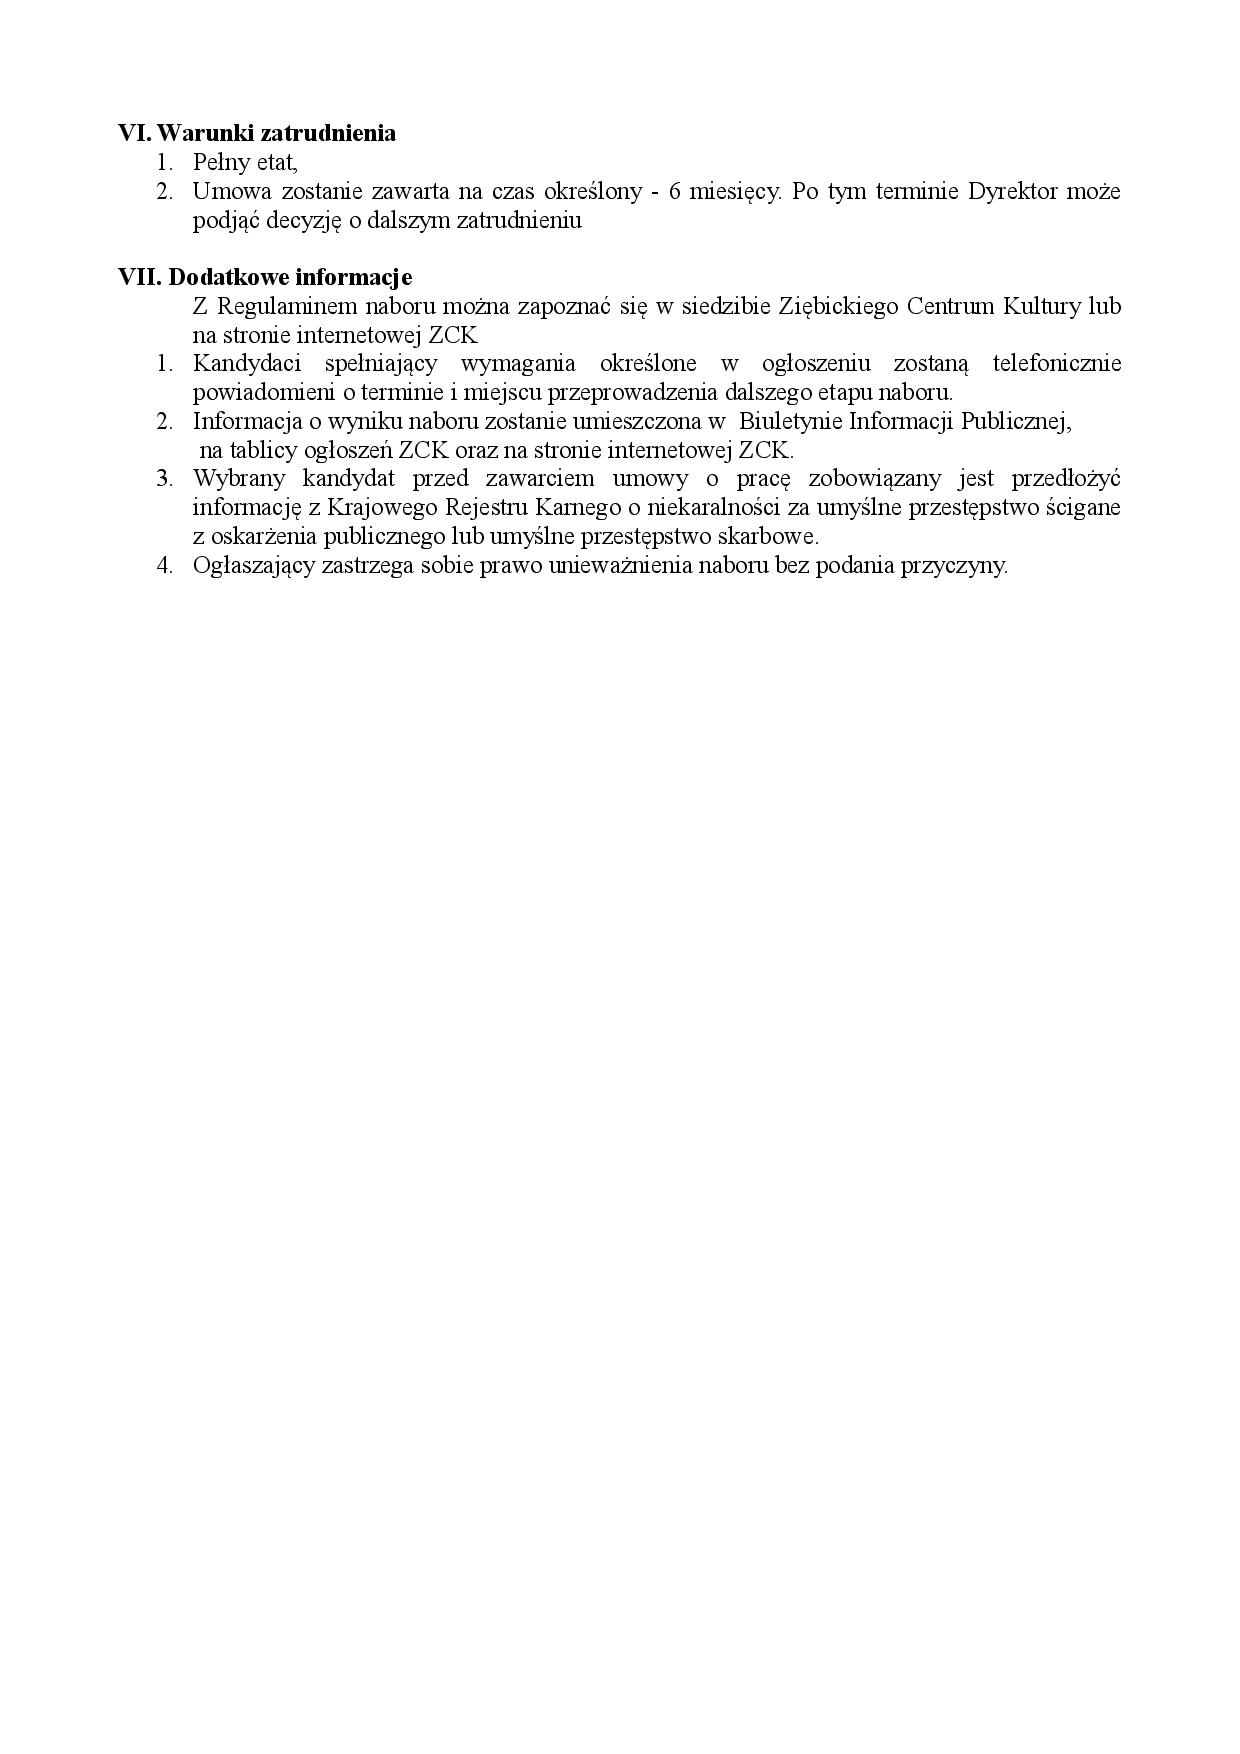 ---- Document-page-003.jpg